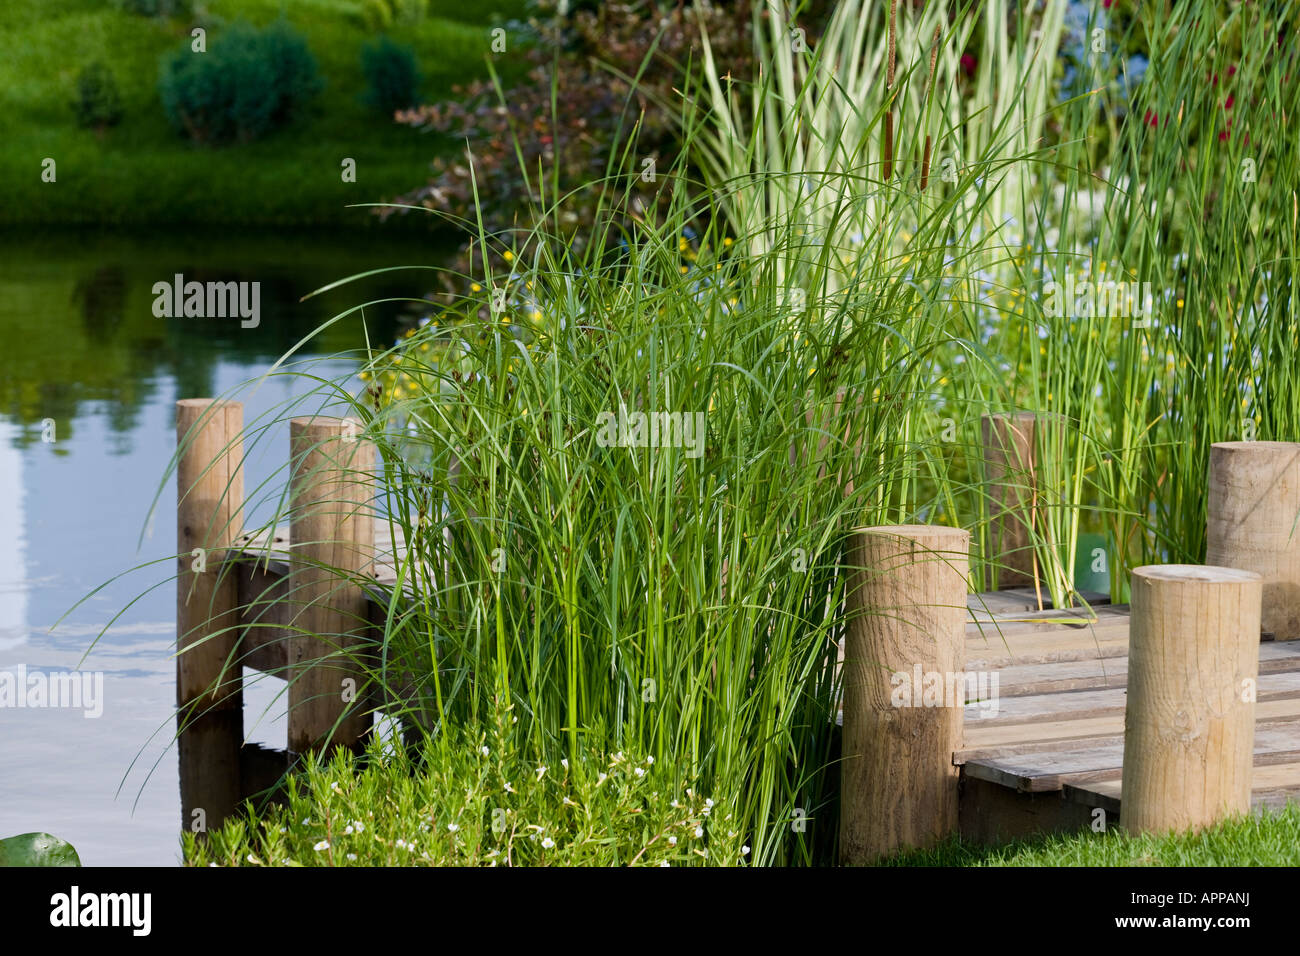 Rustic jetty with circular wooden posts and marginal planting at edge of pool including Cyperus eragrostis and Typha minima Stock Photo